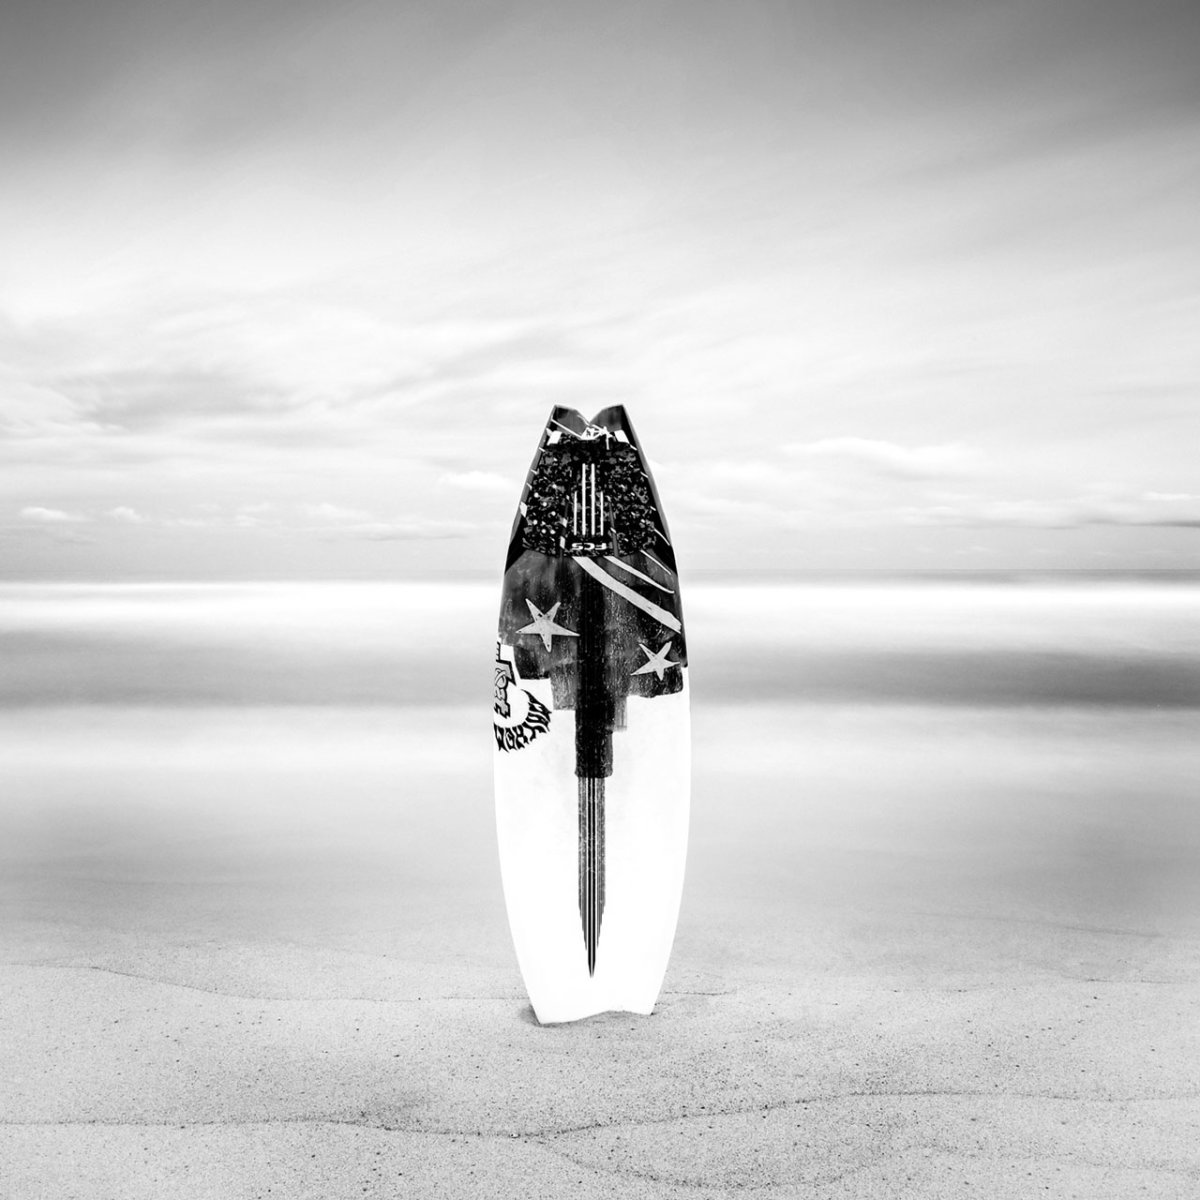 Gal-white-room-SURFBOARD-AT-WHITE-SANDS-MONO-CHROMA-1